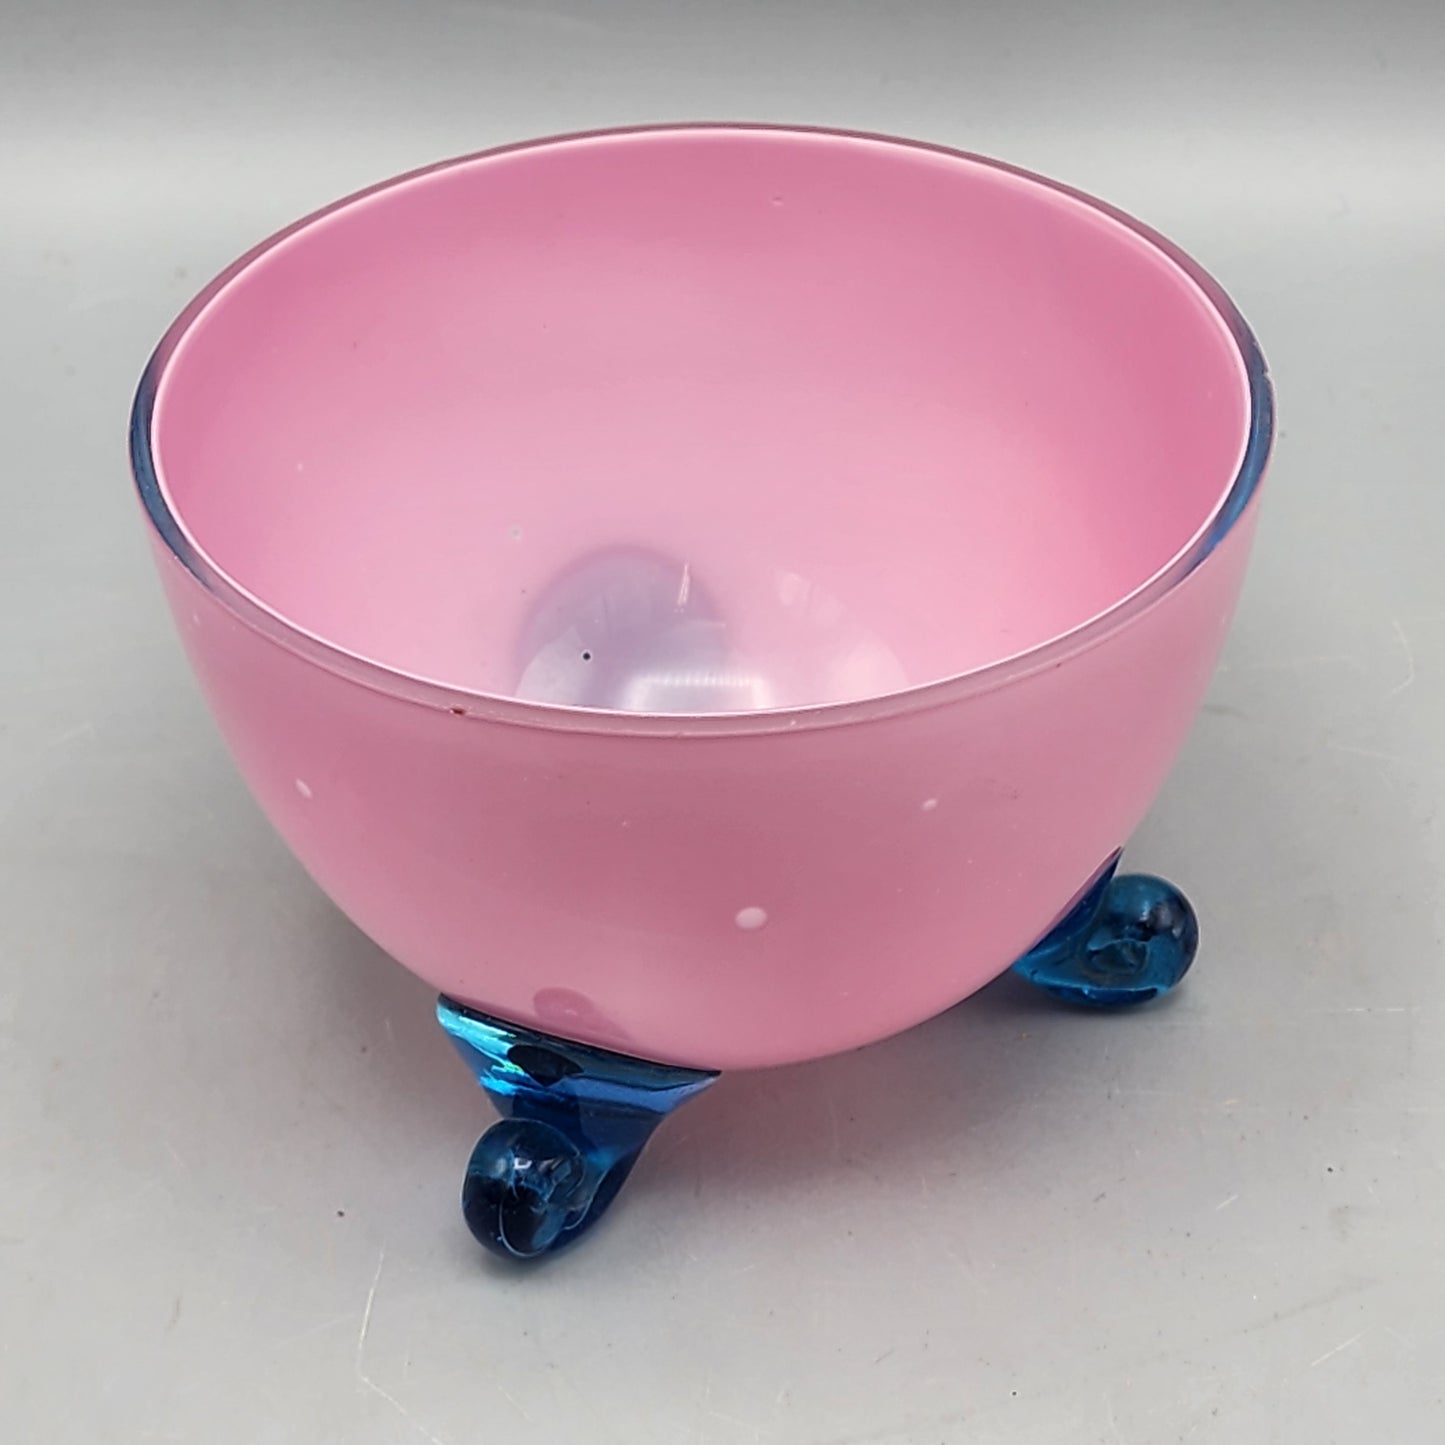 Bohemian Art Deco Pink and Blue Footed Lidded Candy Dish